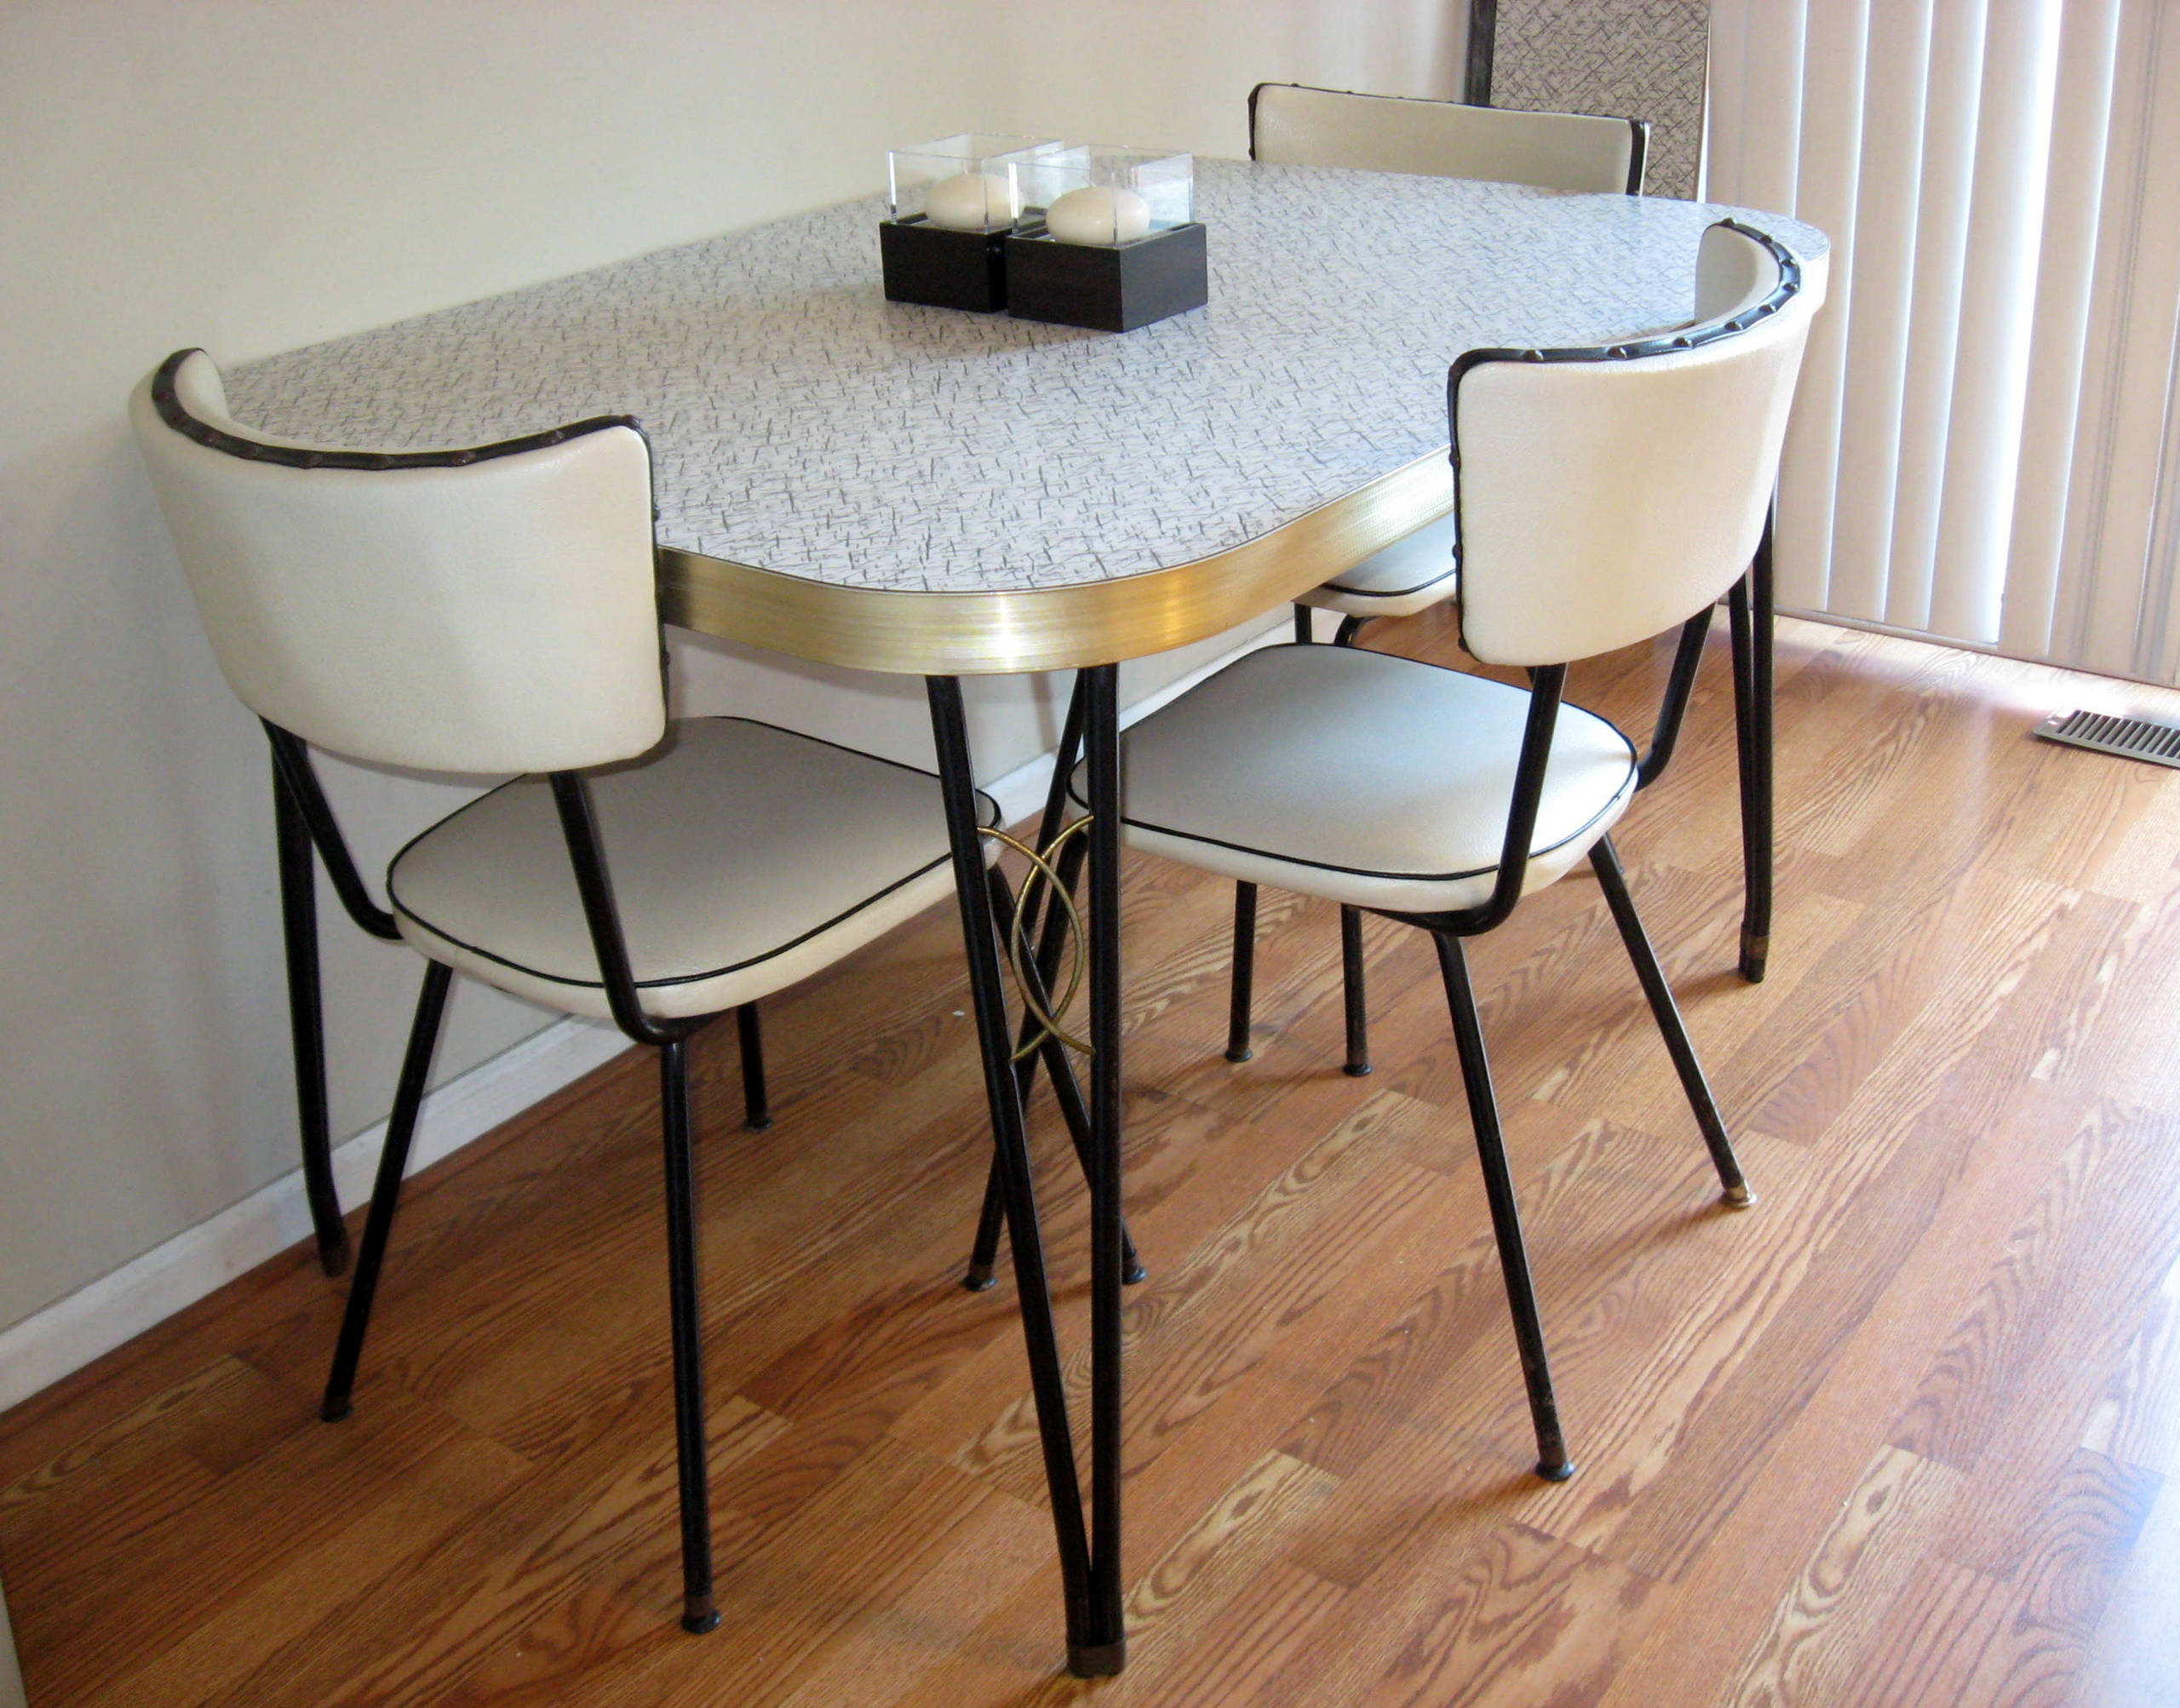 Retro Kitchen Table And Chairs Visualhunt, Vintage Metal Kitchen Table And Chair Sets